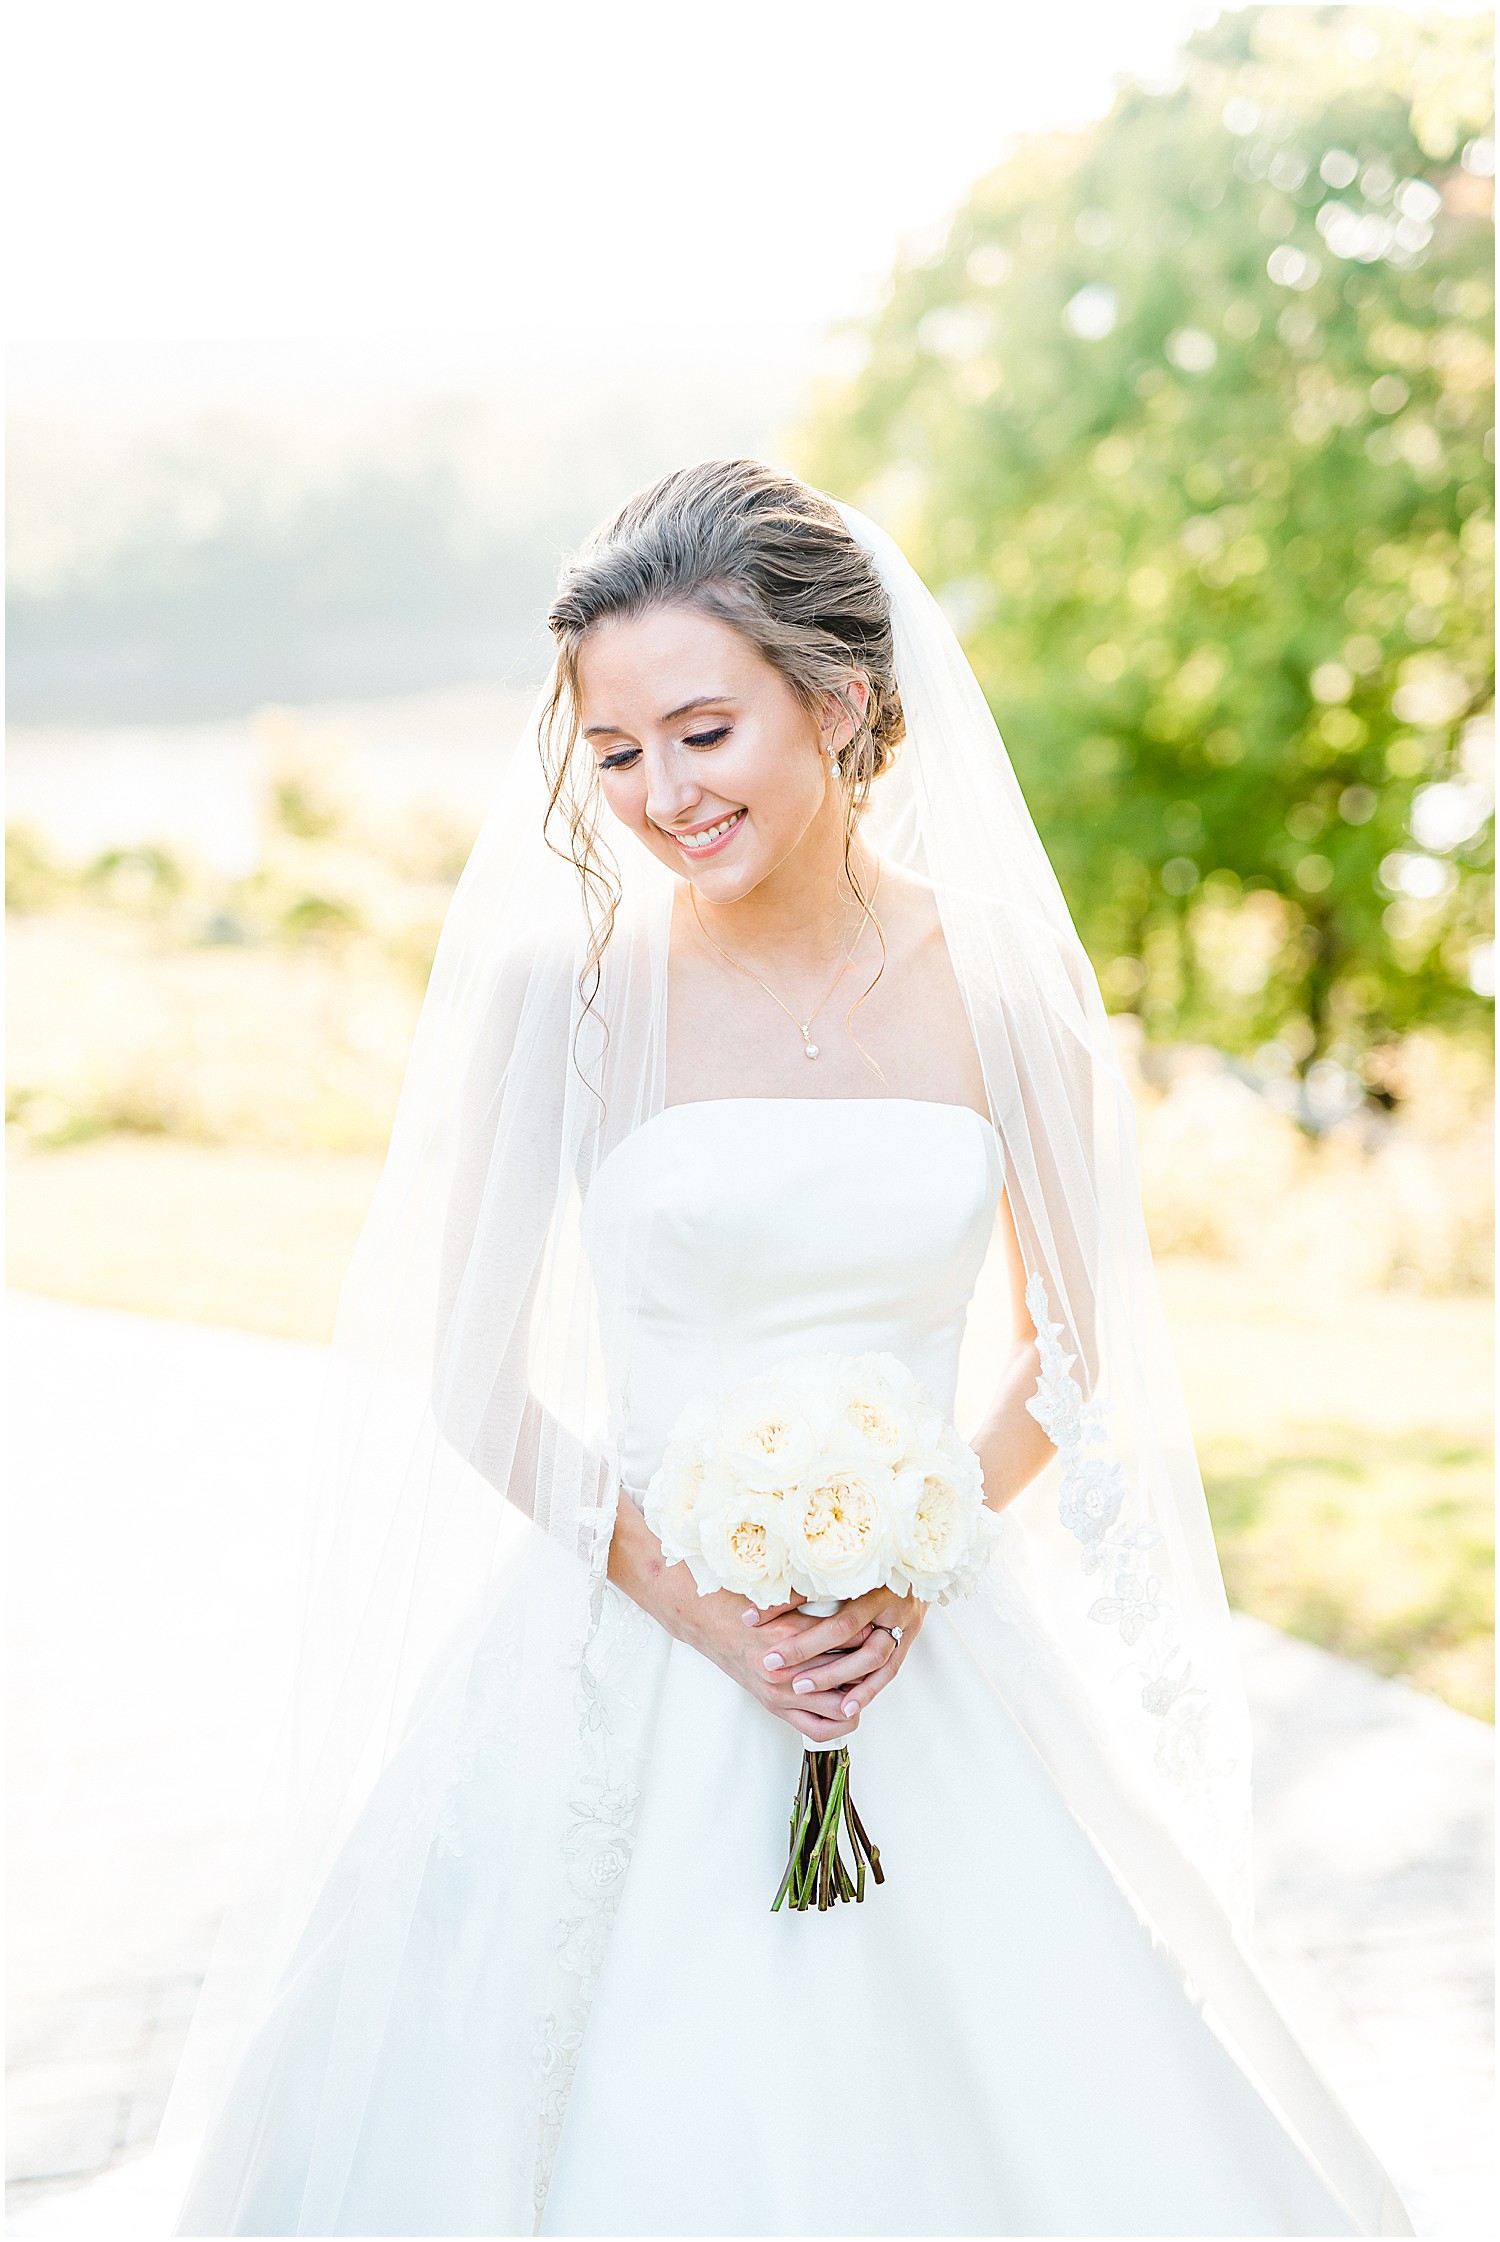 bridal portrait with bouquet and veil over shoulders on wedding day